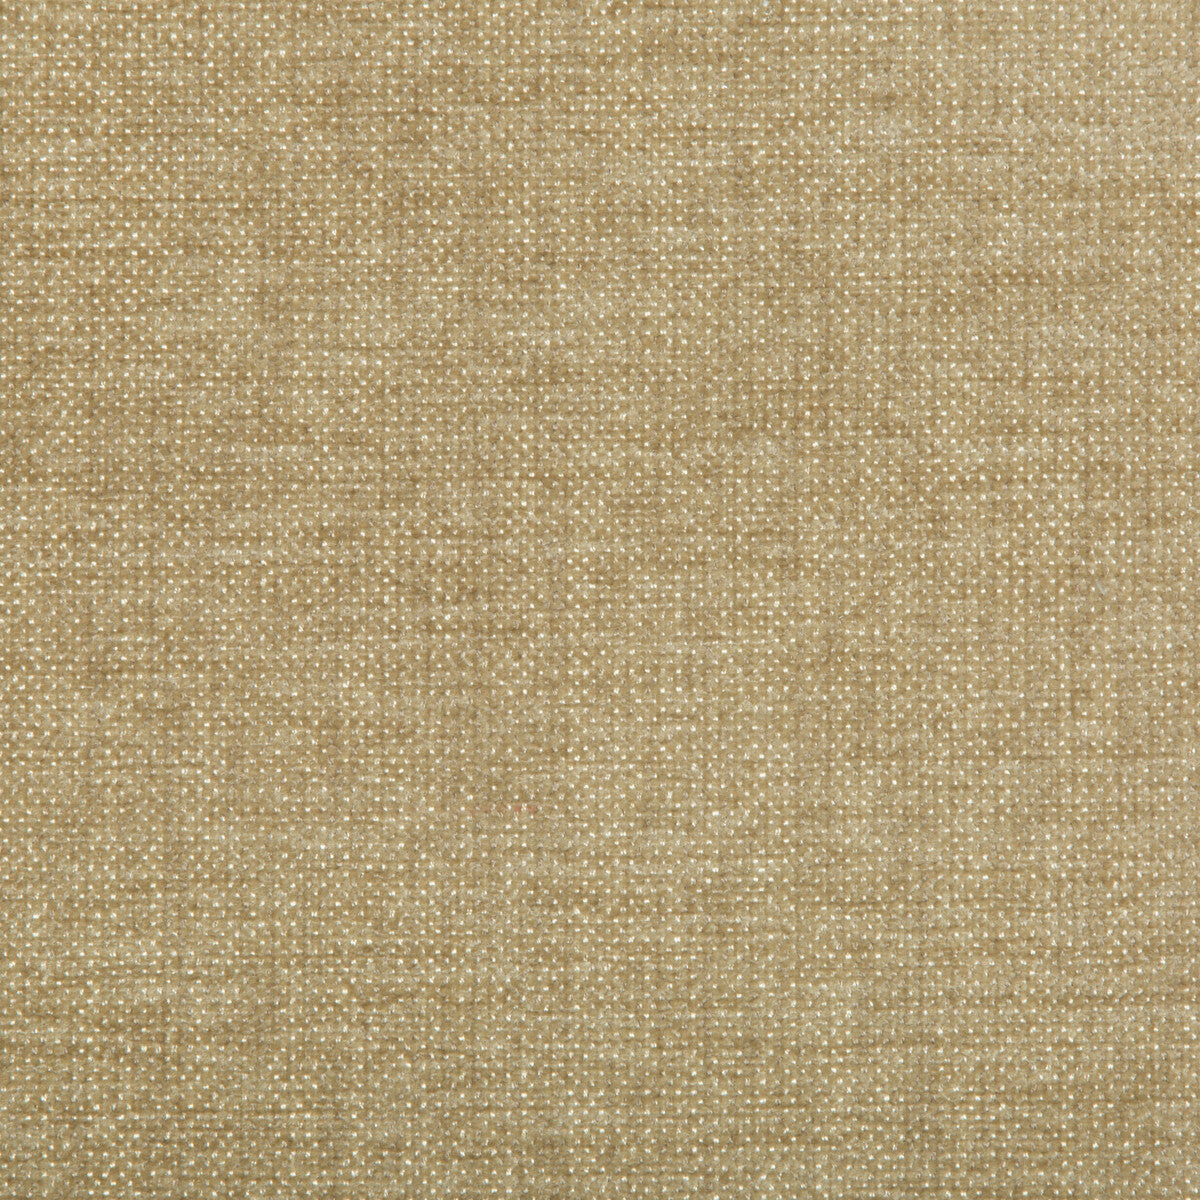 Kravet Smart fabric in 35393-16 color - pattern 35393.16.0 - by Kravet Smart in the Performance Crypton Home collection